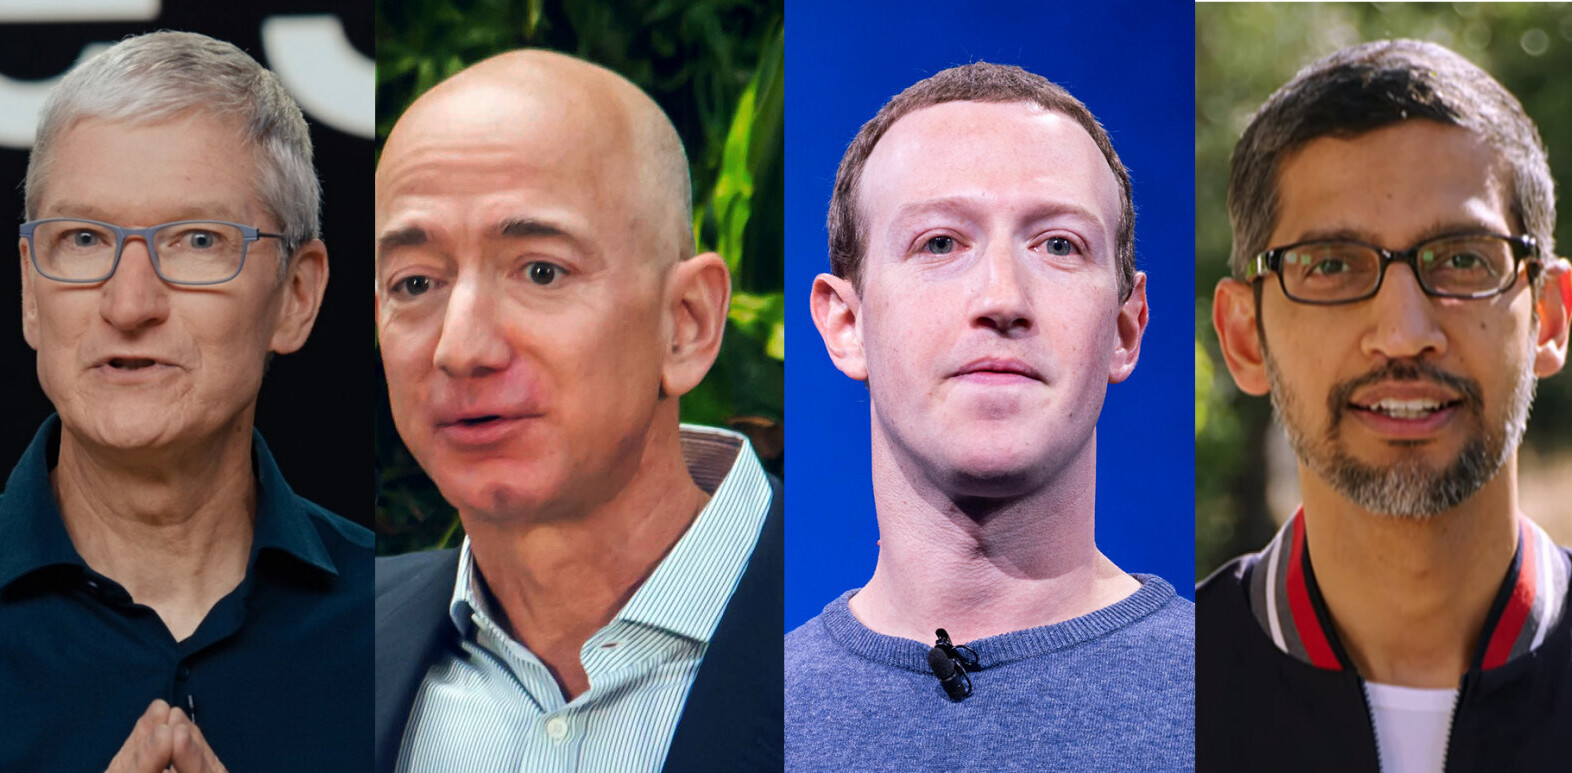 Amazon, Apple, Facebook, and Google CEOs to face antitrust committee that owns $100K+ of those companies’ stocks